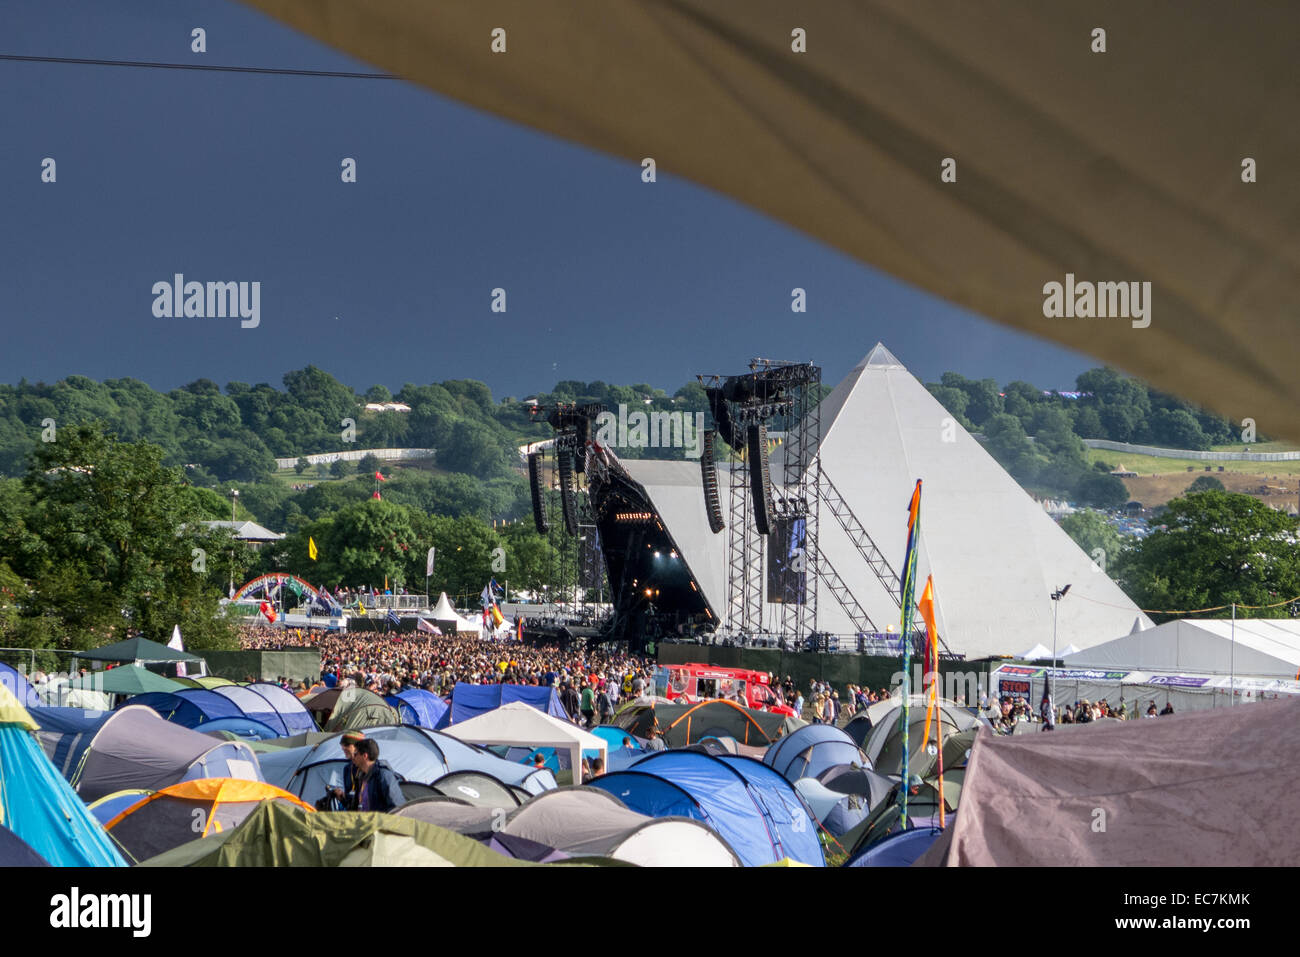 The Pyramid Stage at The Glastonbury Festival in Somerset, England. Stock Photo